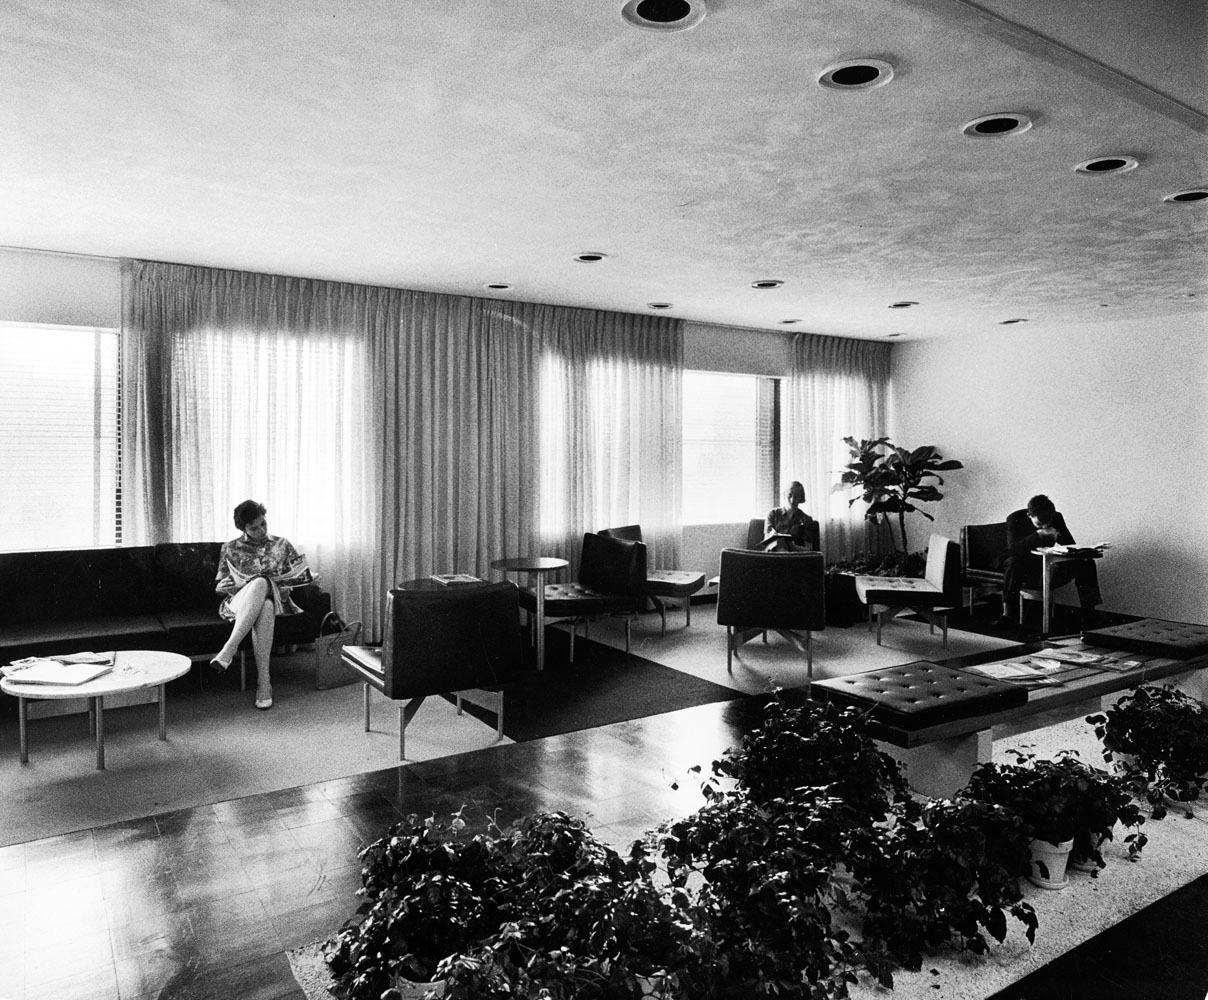 Although the office's design mirrored Modernism's celebration of function over form, it also represented what was the most decadent and sought-after in the era's aesthetic. For instance, the reception lounges outside of the work spaces were luxurious, sleek and inviting.